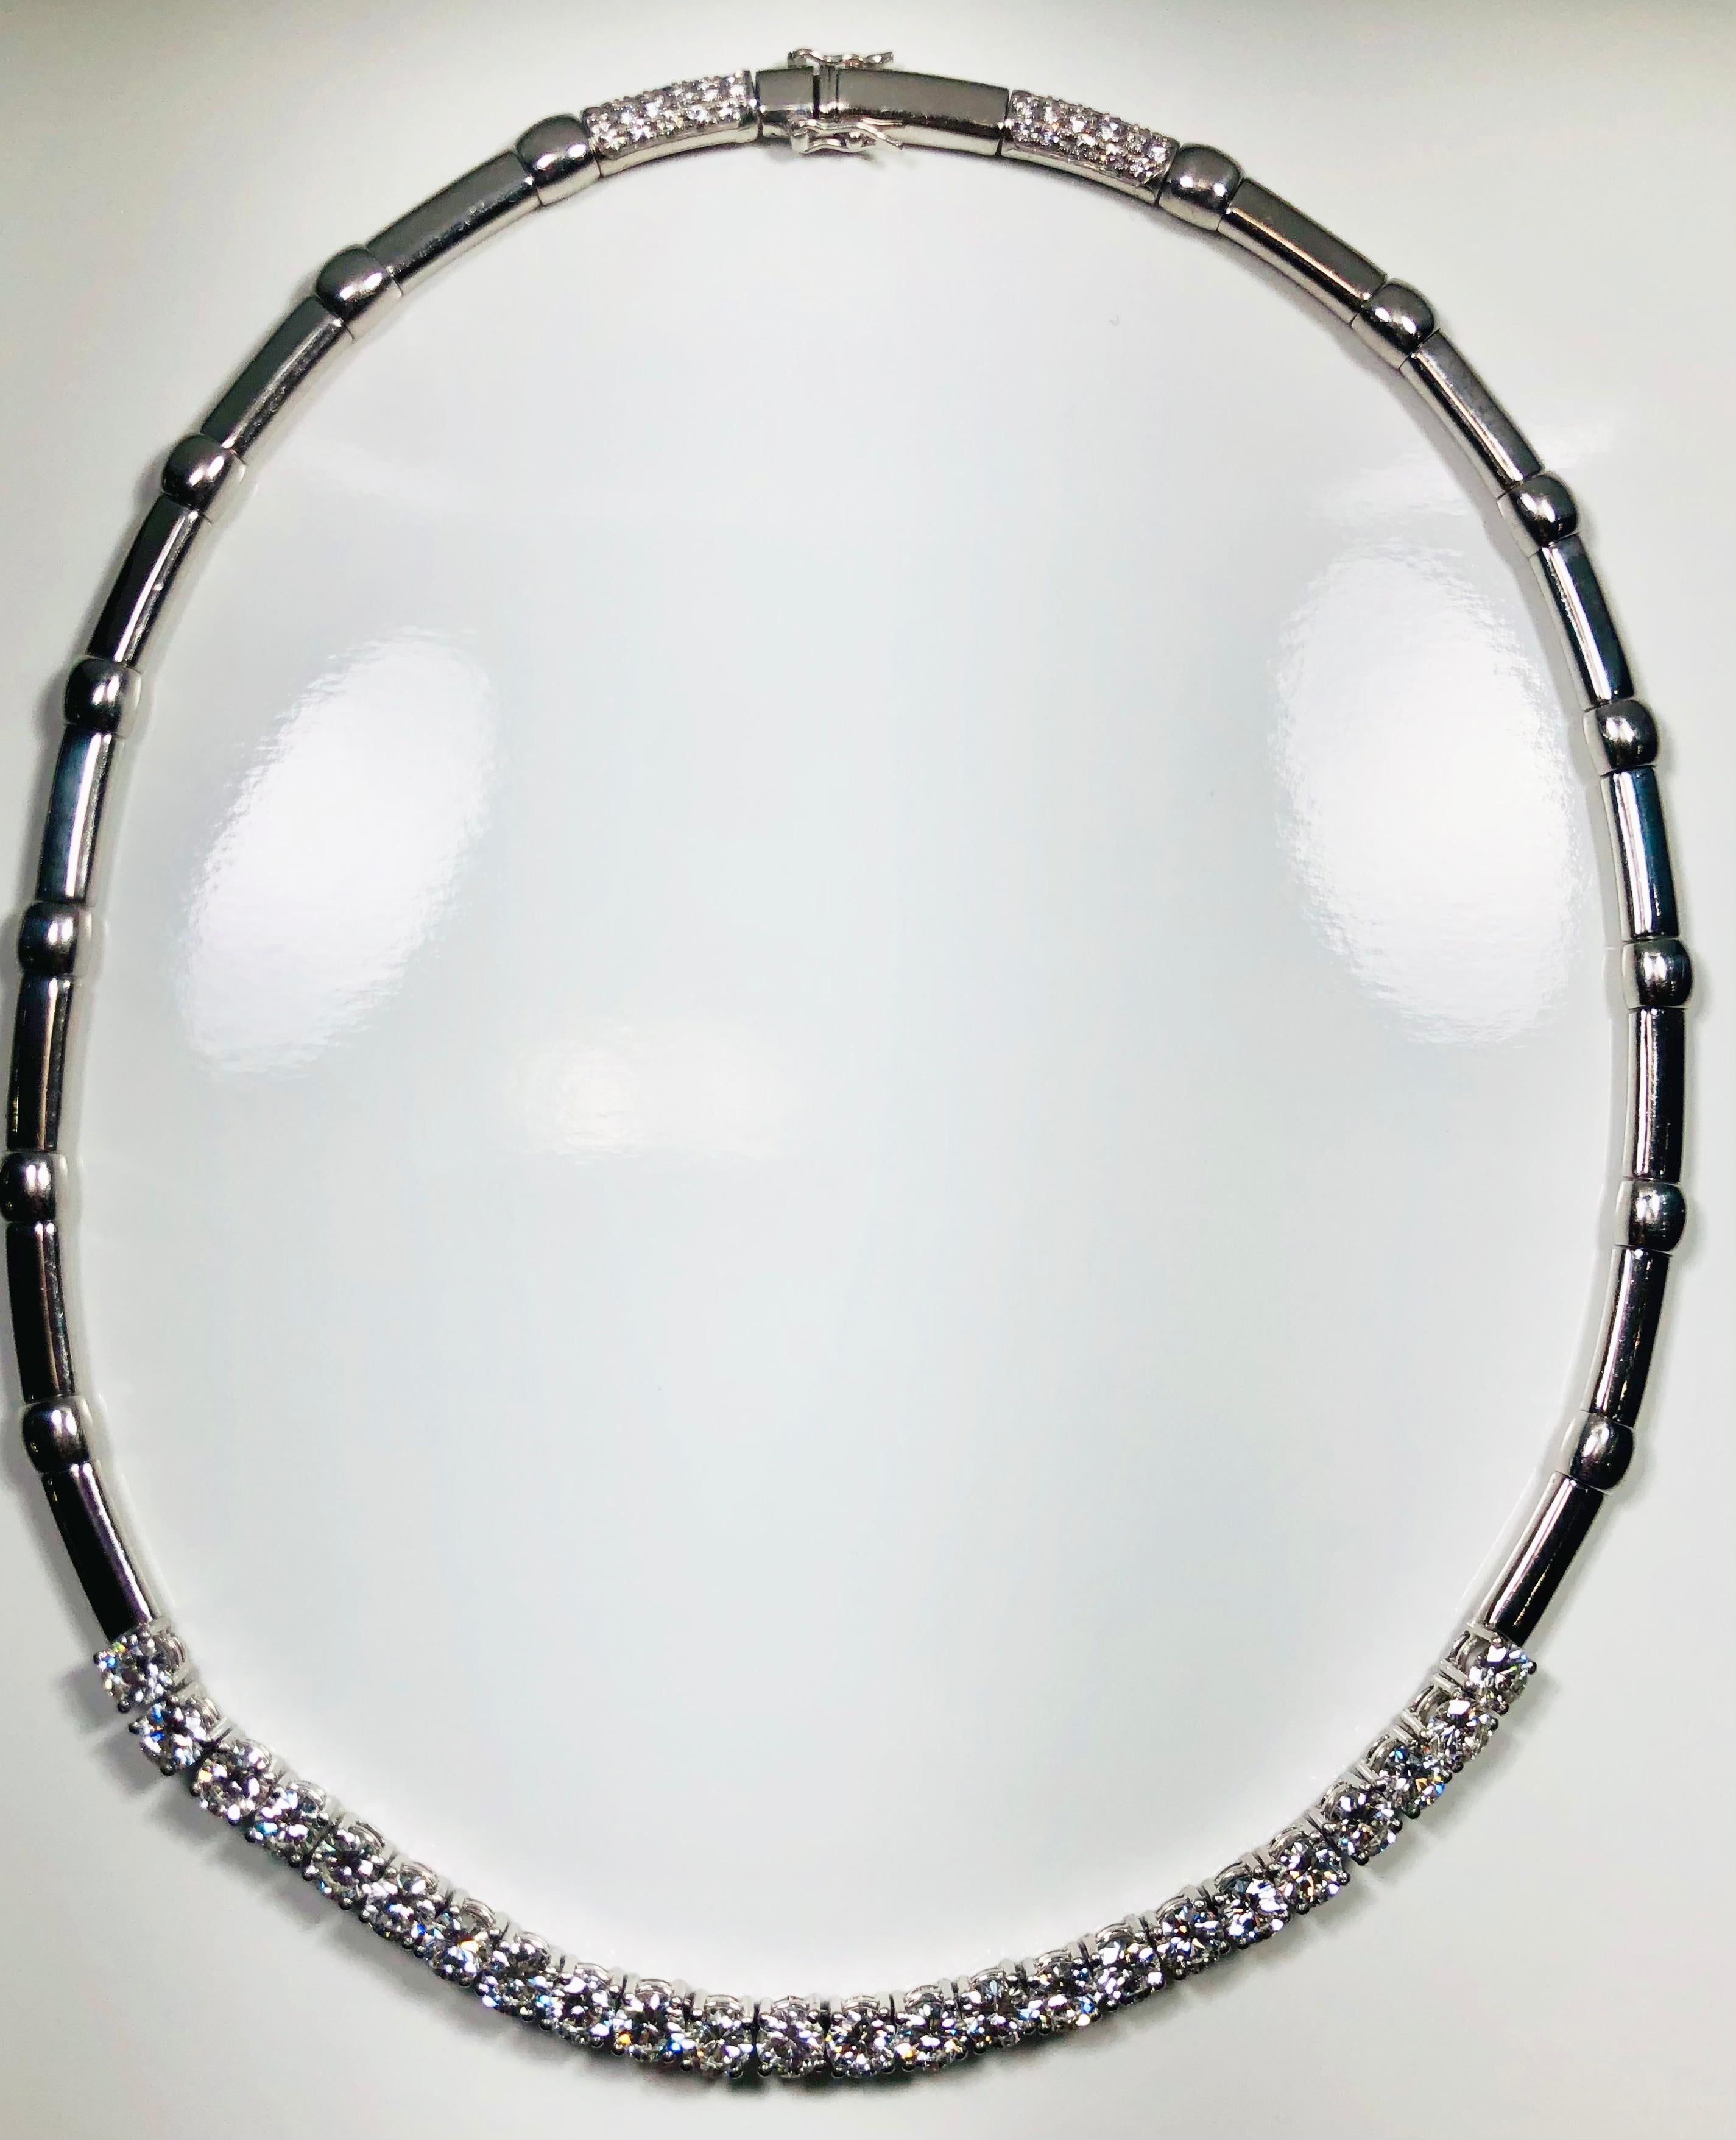 Beautiful Riviere of 24 diamonds set choker necklace with pavé of diamonds in closure 
24 high-color, 0.80ct brilliant-cut diamonds * totaling 19.2 carats, create a seamless river of bright-white flash and sparkle in this gorgeous necklace,